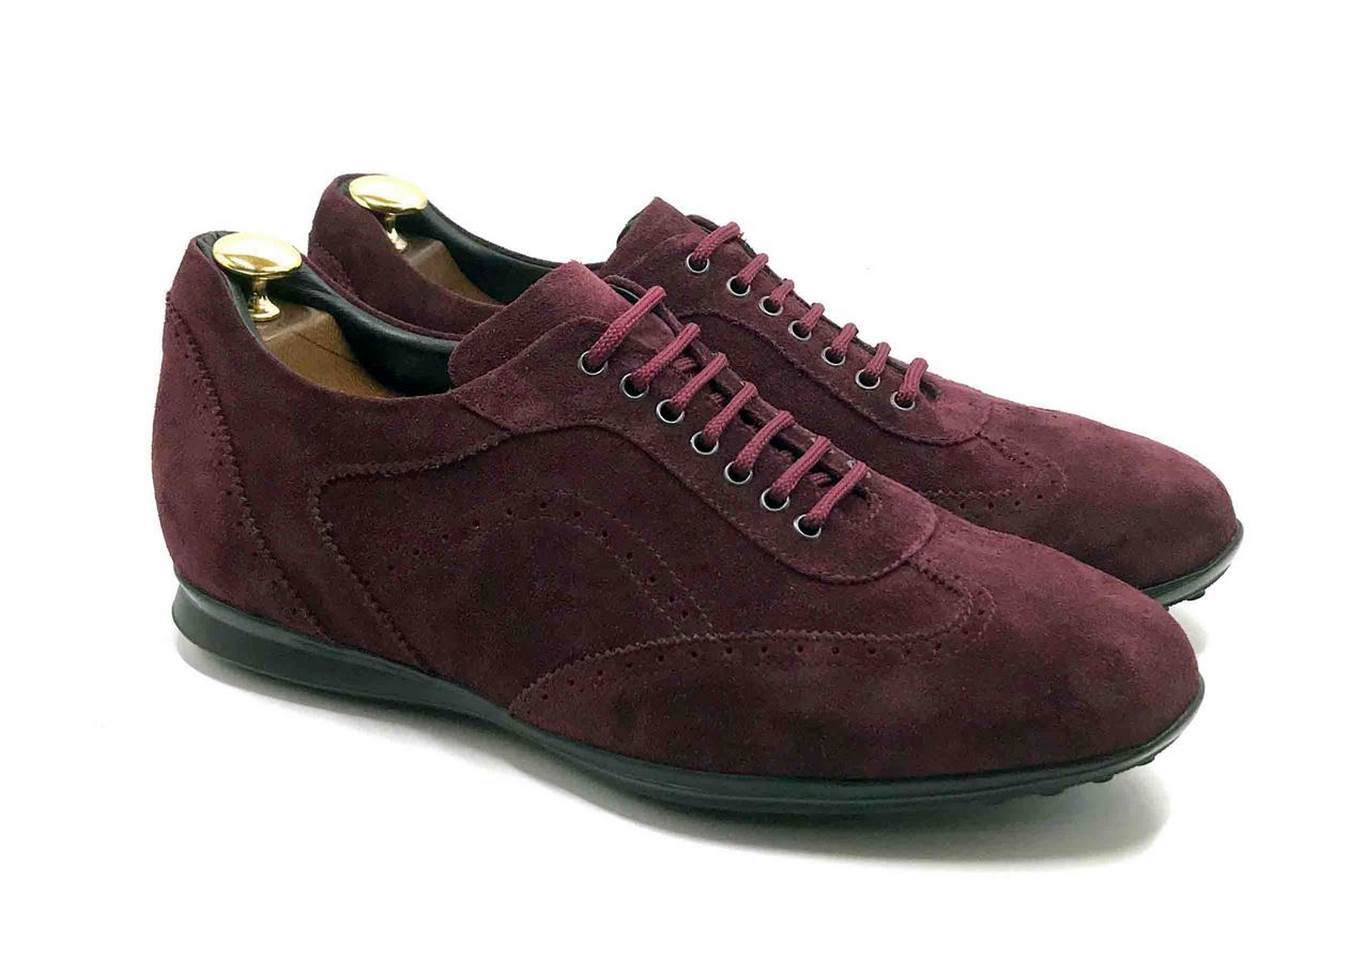 Smart Sneaker in deep Bordeaux suede with extractable innersole